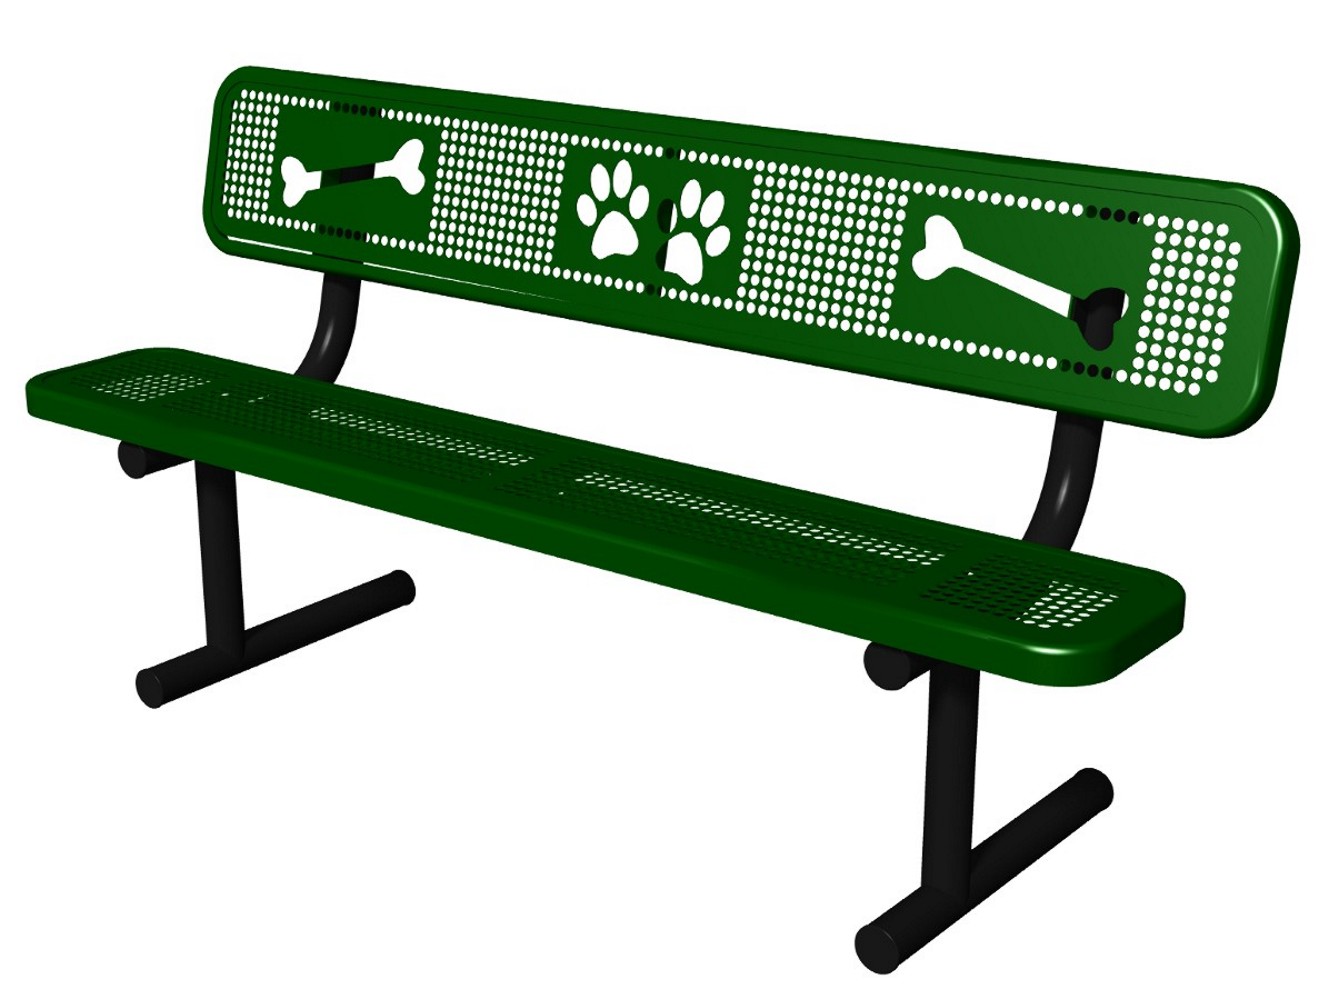 Sit & Stay Bench - Dog Park Equipment - American Parks Company